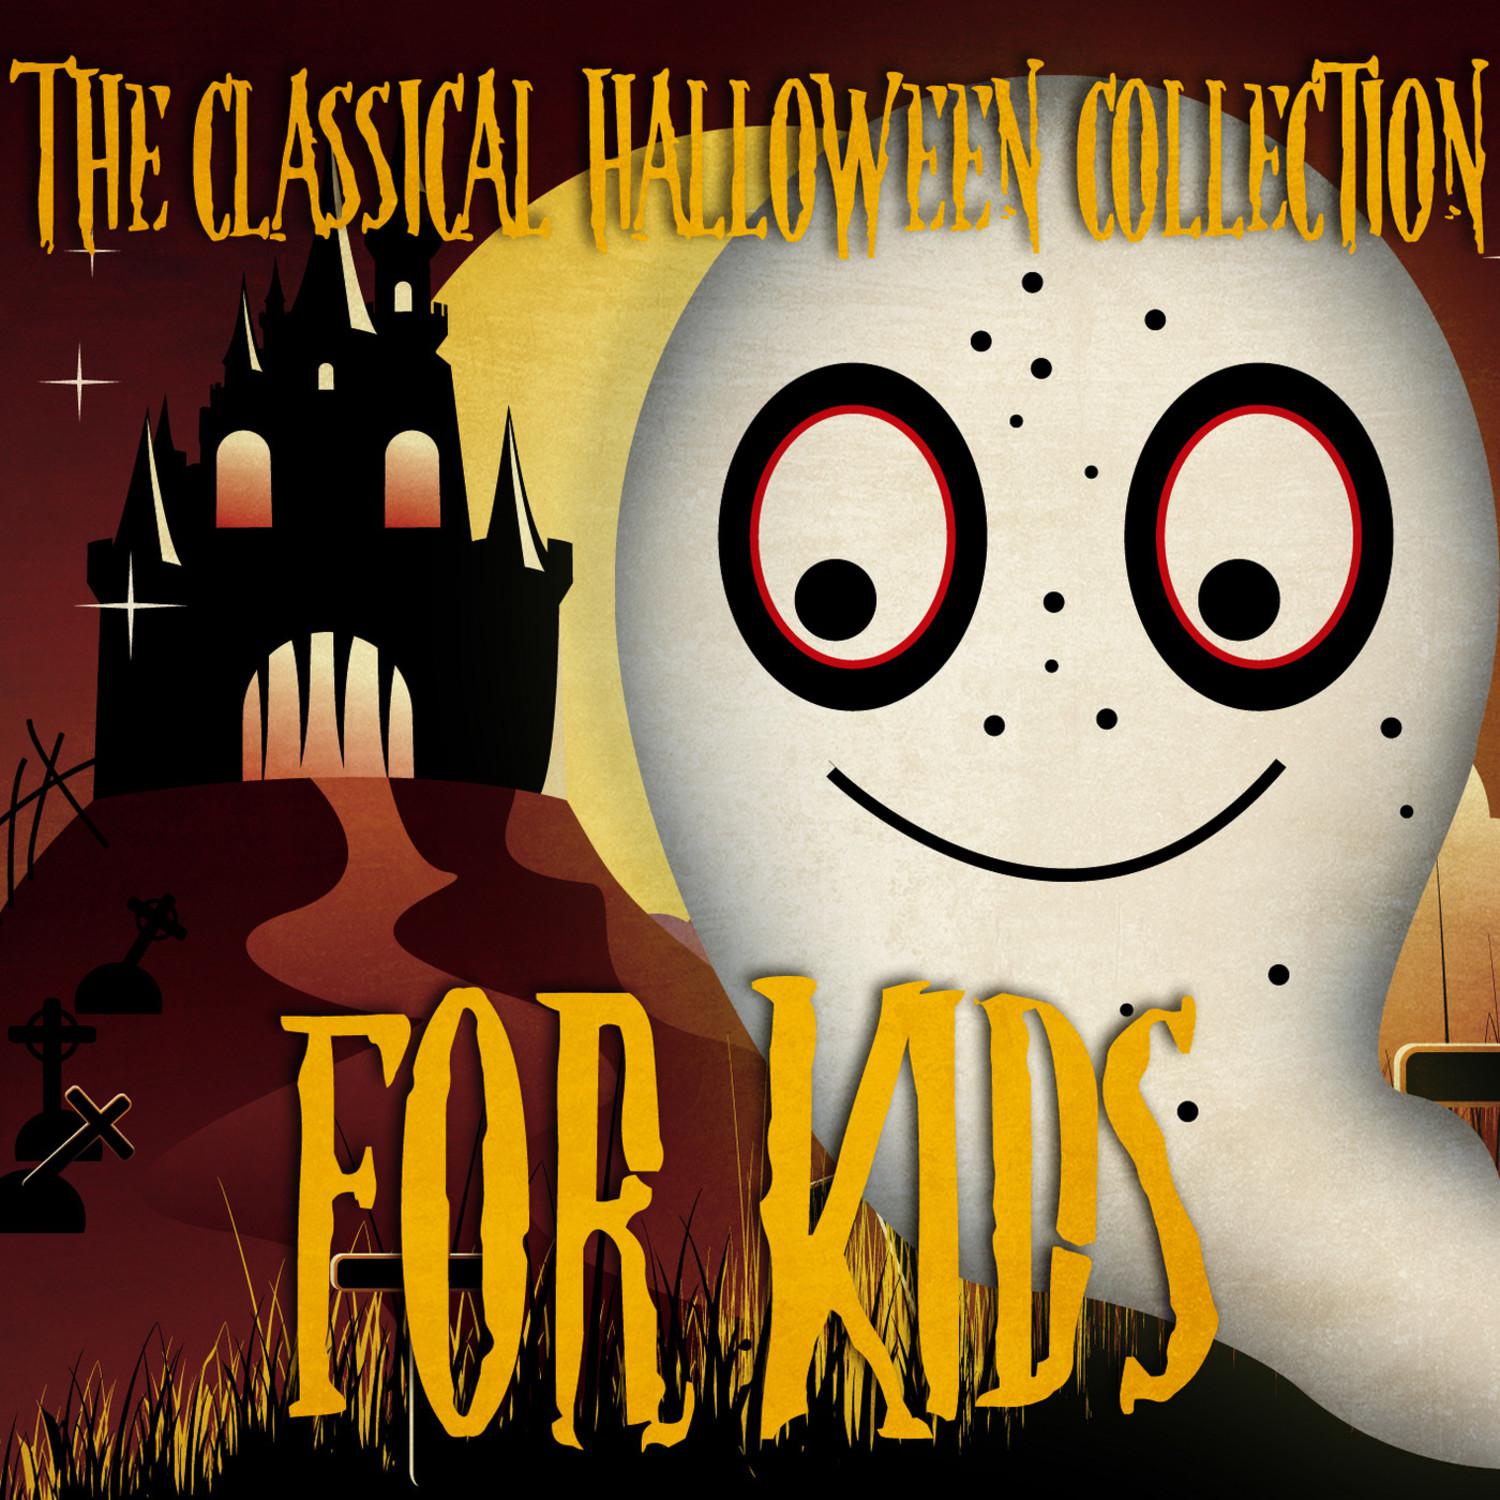 The Classical Halloween Collection for Kids